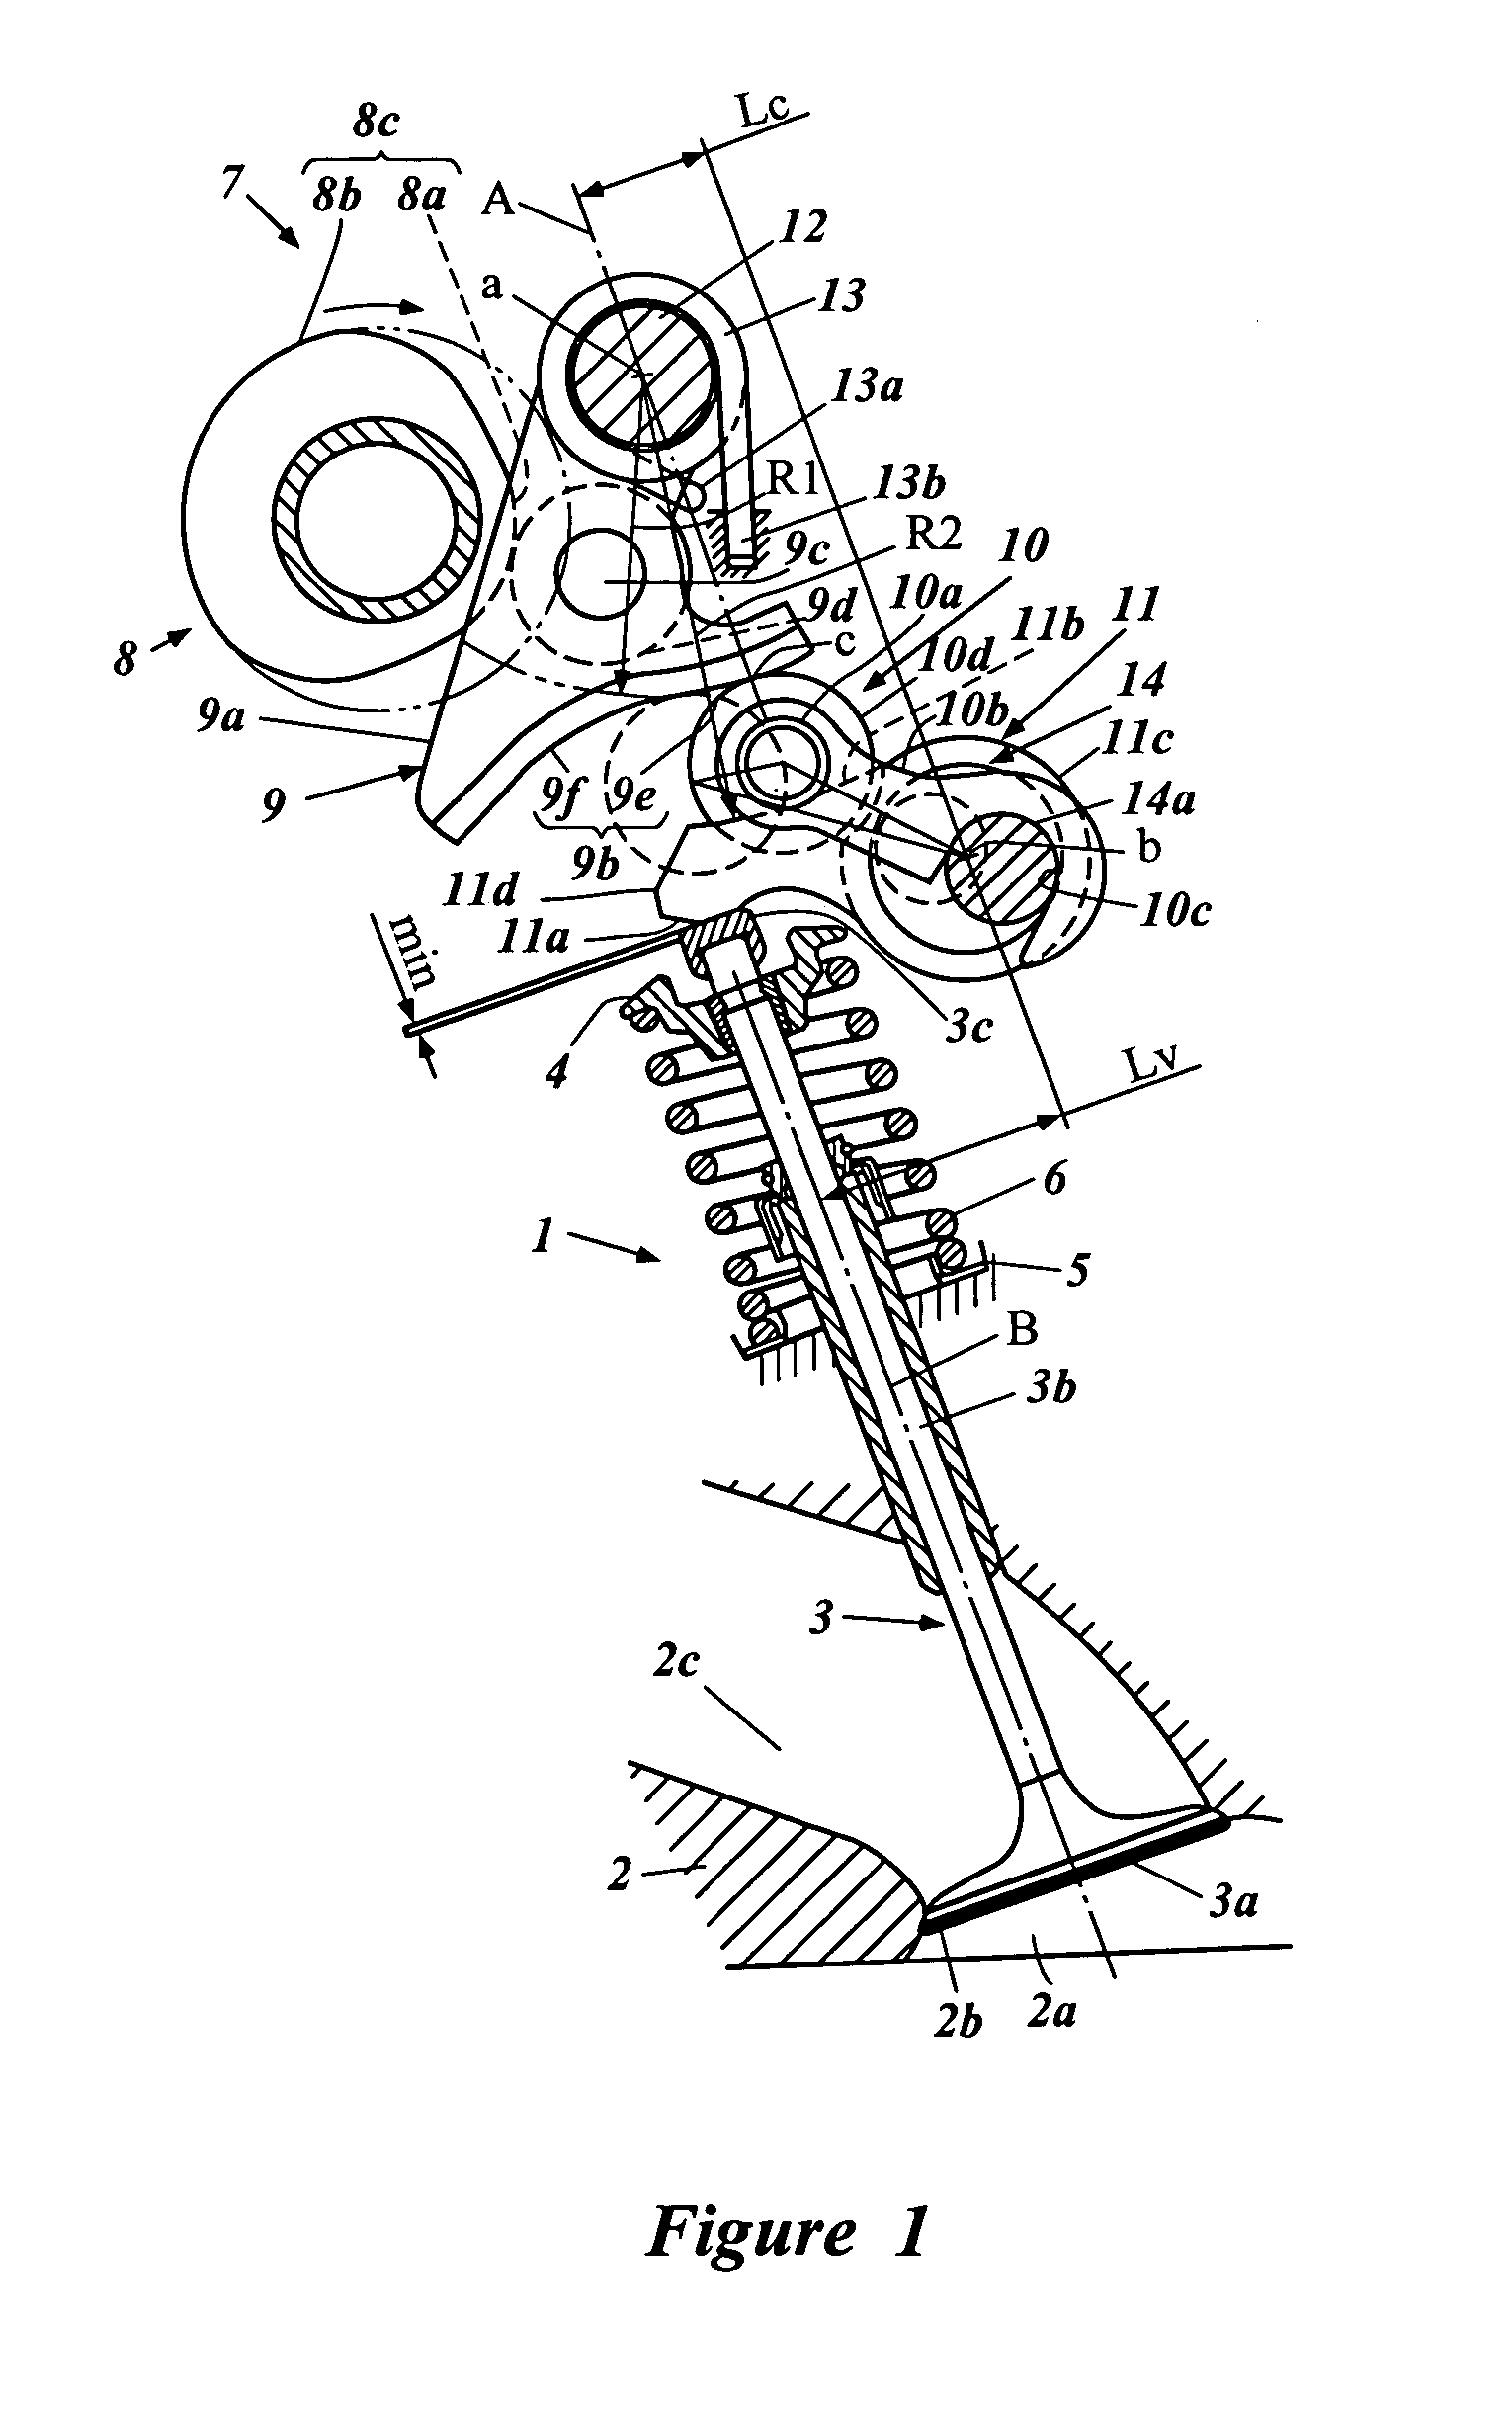 Valve train device for an engine